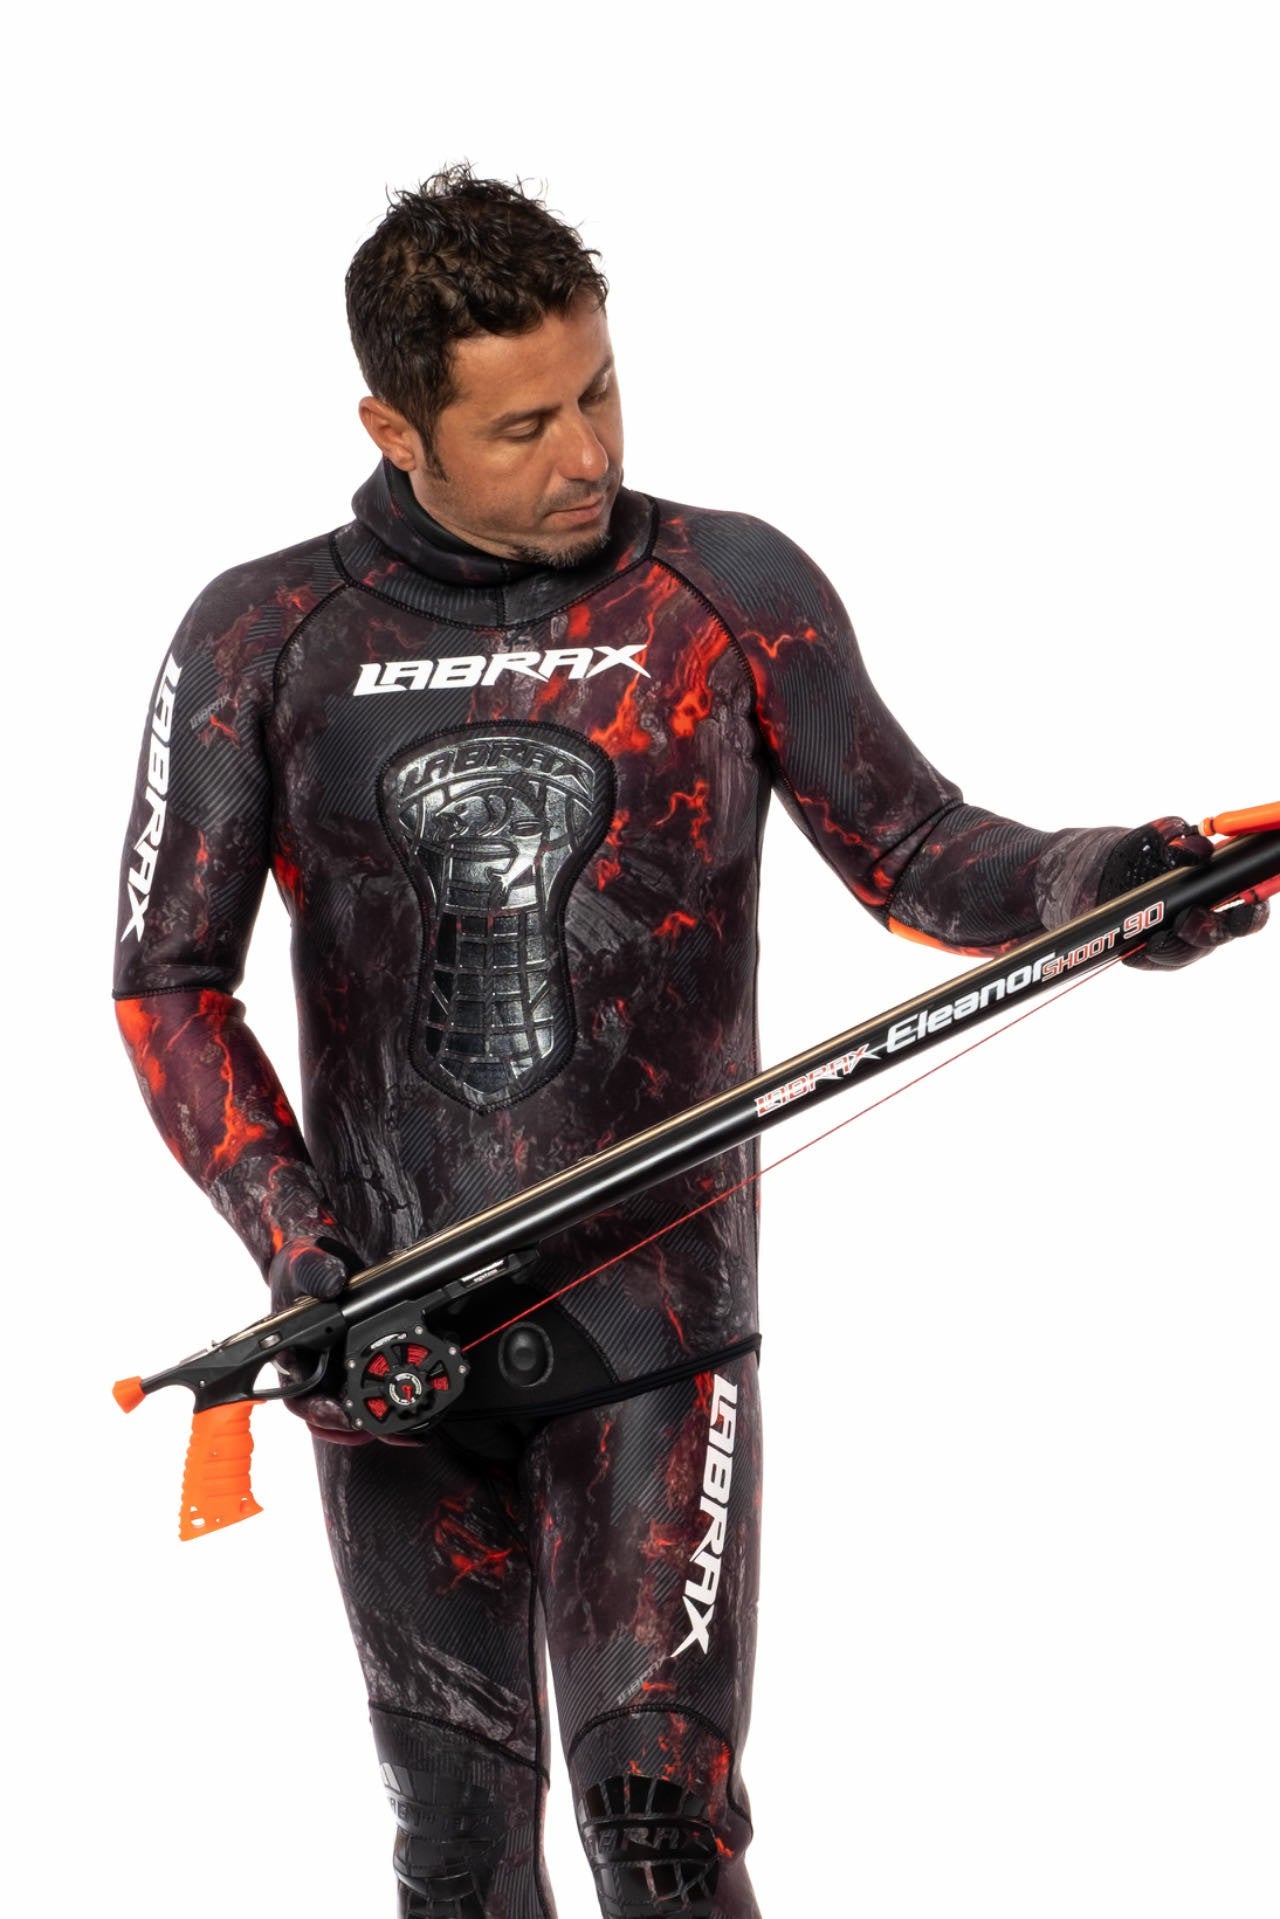 Wholesale open cell wetsuit For Underwater Thermal Protection 